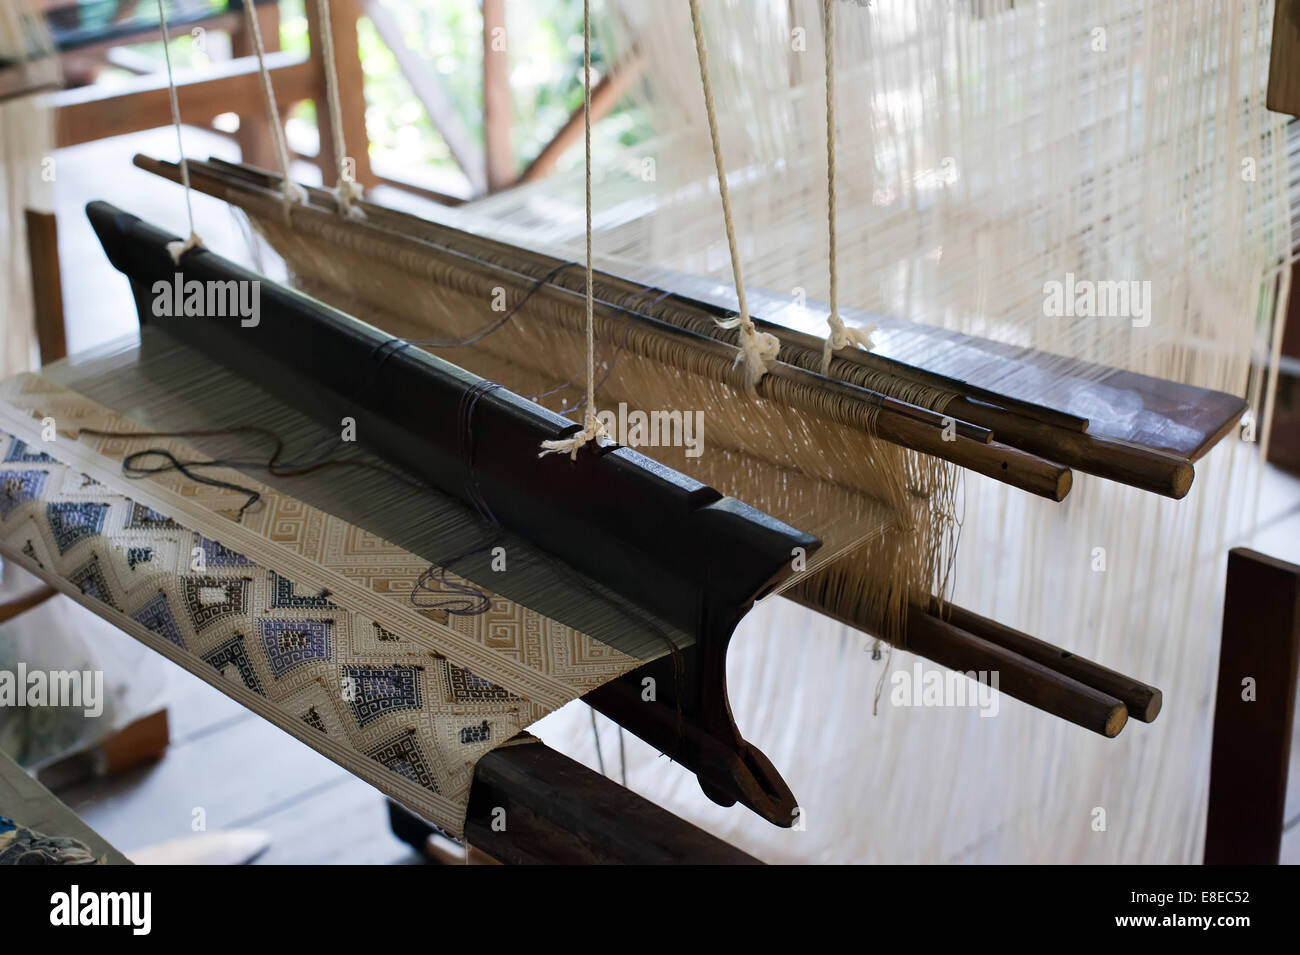 Vintage manual weaving loom with unfinished textile work Stock Photo